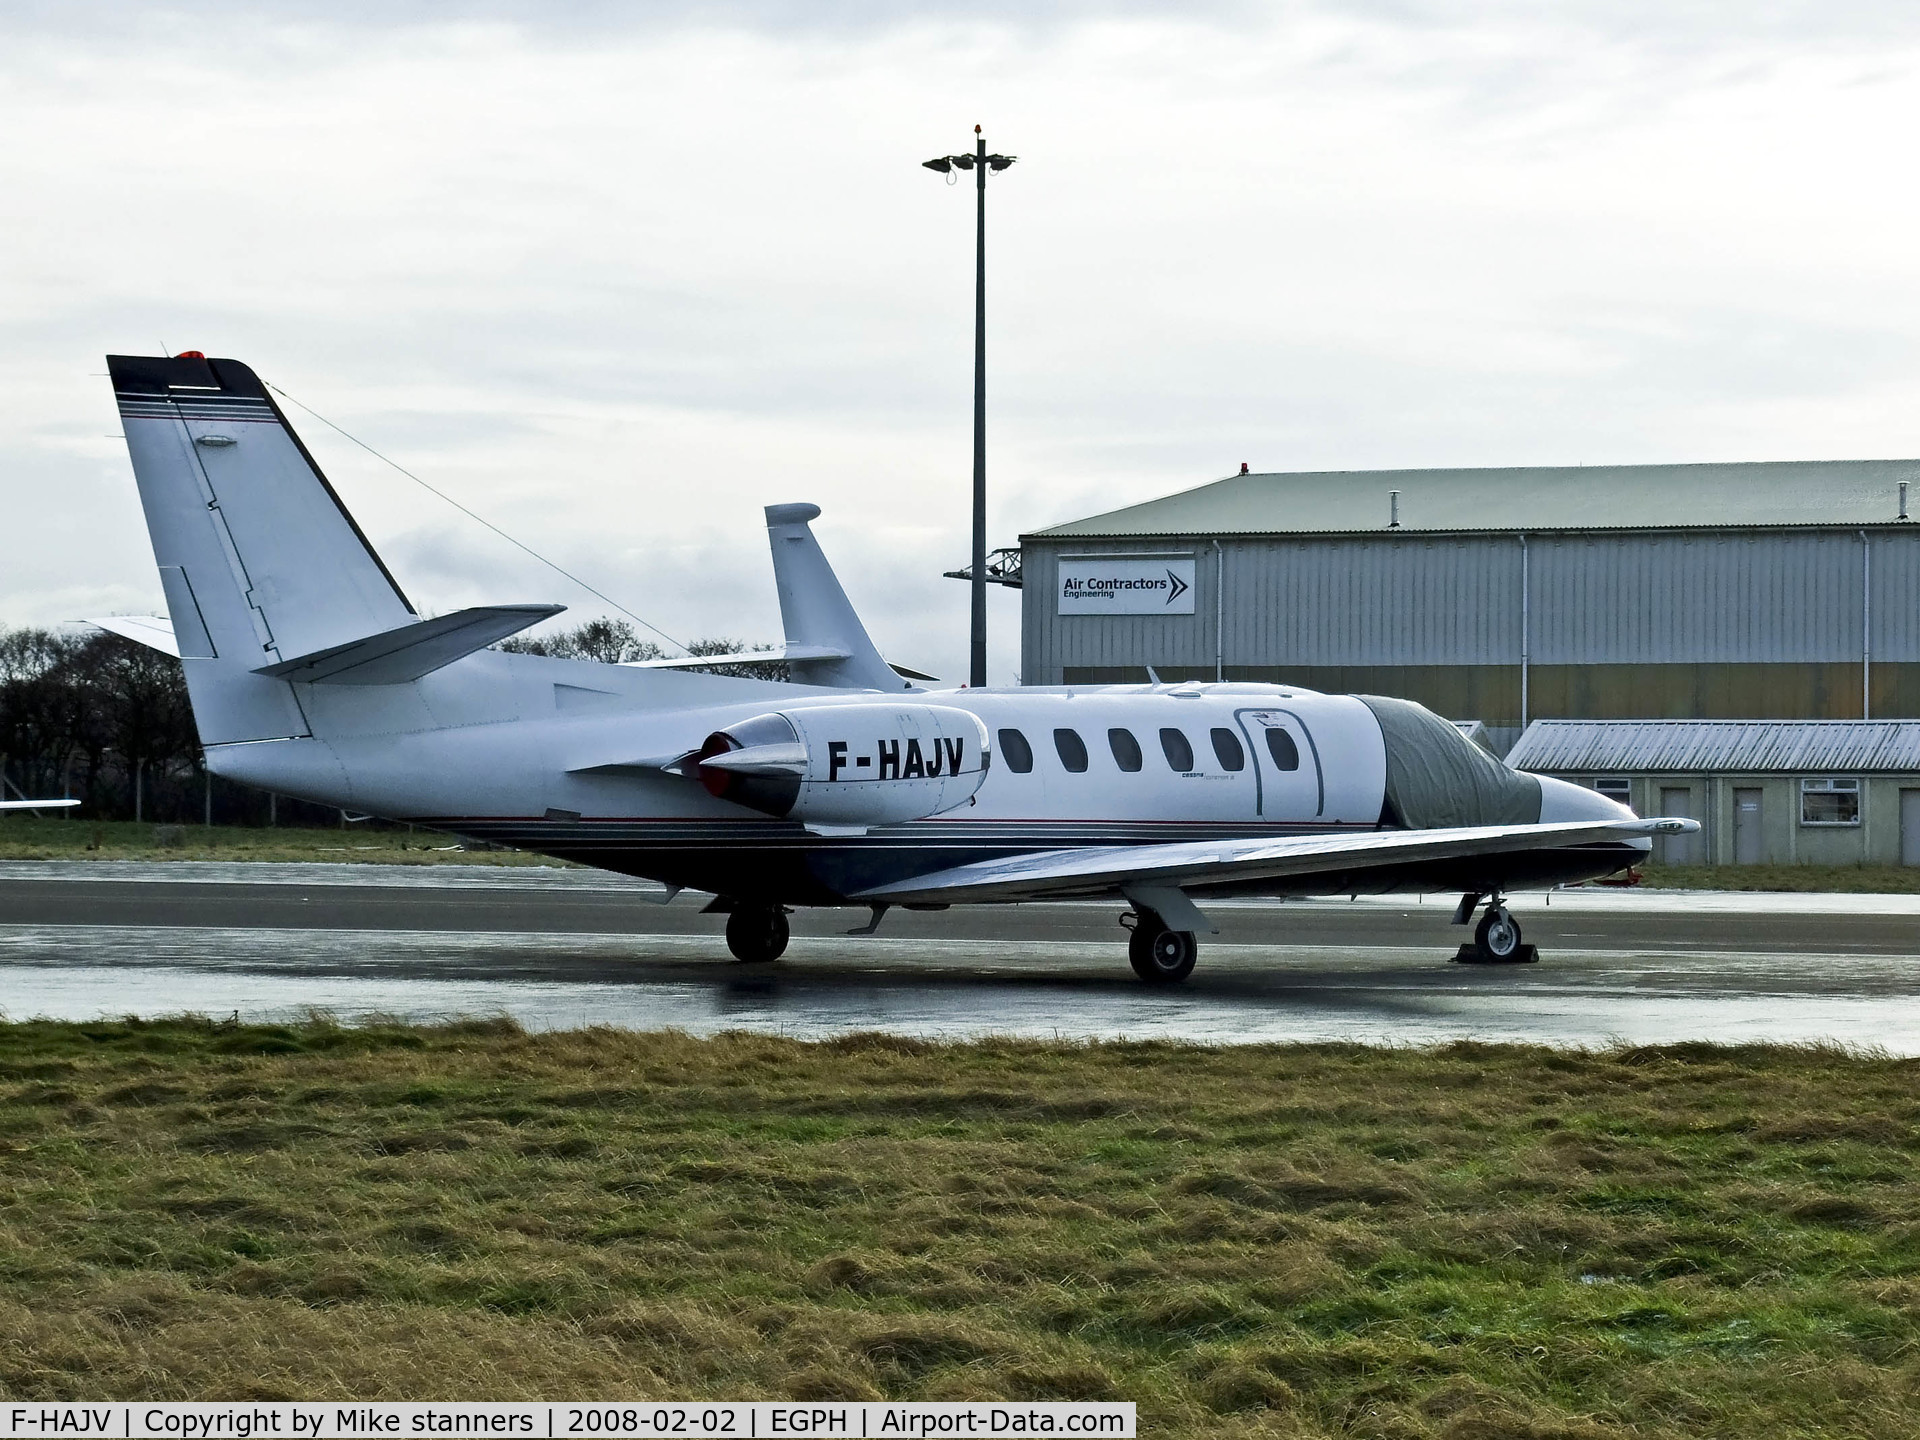 F-HAJV, 1989 Cessna 550 Citation II C/N 550-0622, Cessna citation at EDI, here for a six nations rugby game